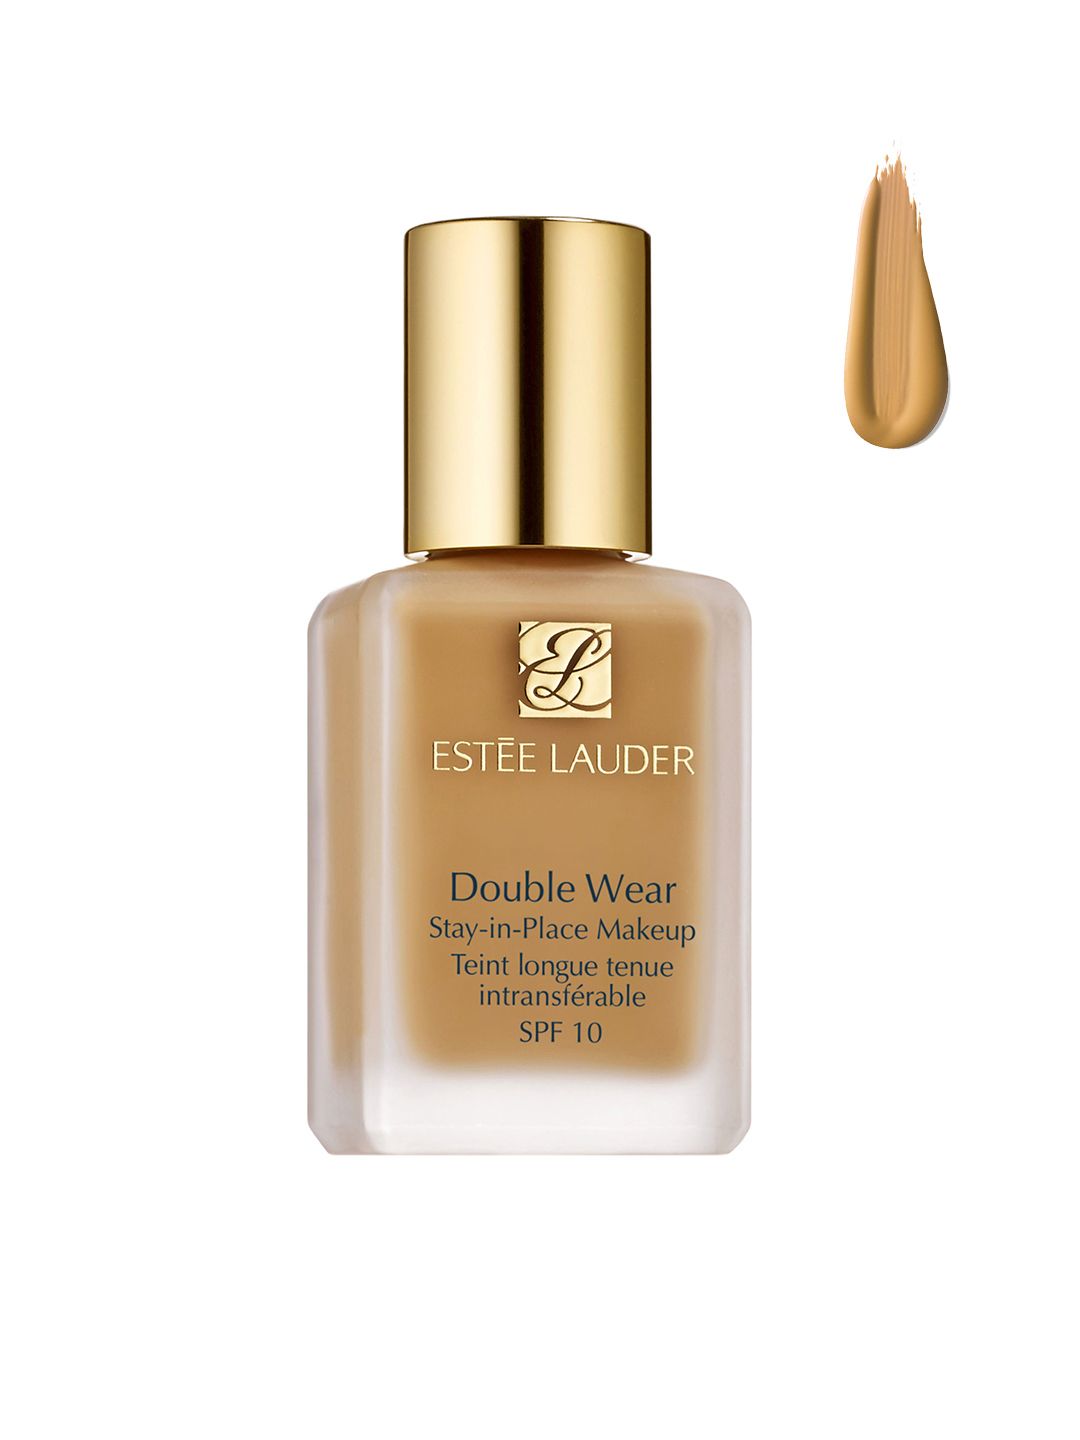 Estee Lauder Tawny Double Wear Stay-in-Place Makeup with SPF 10 Price in India